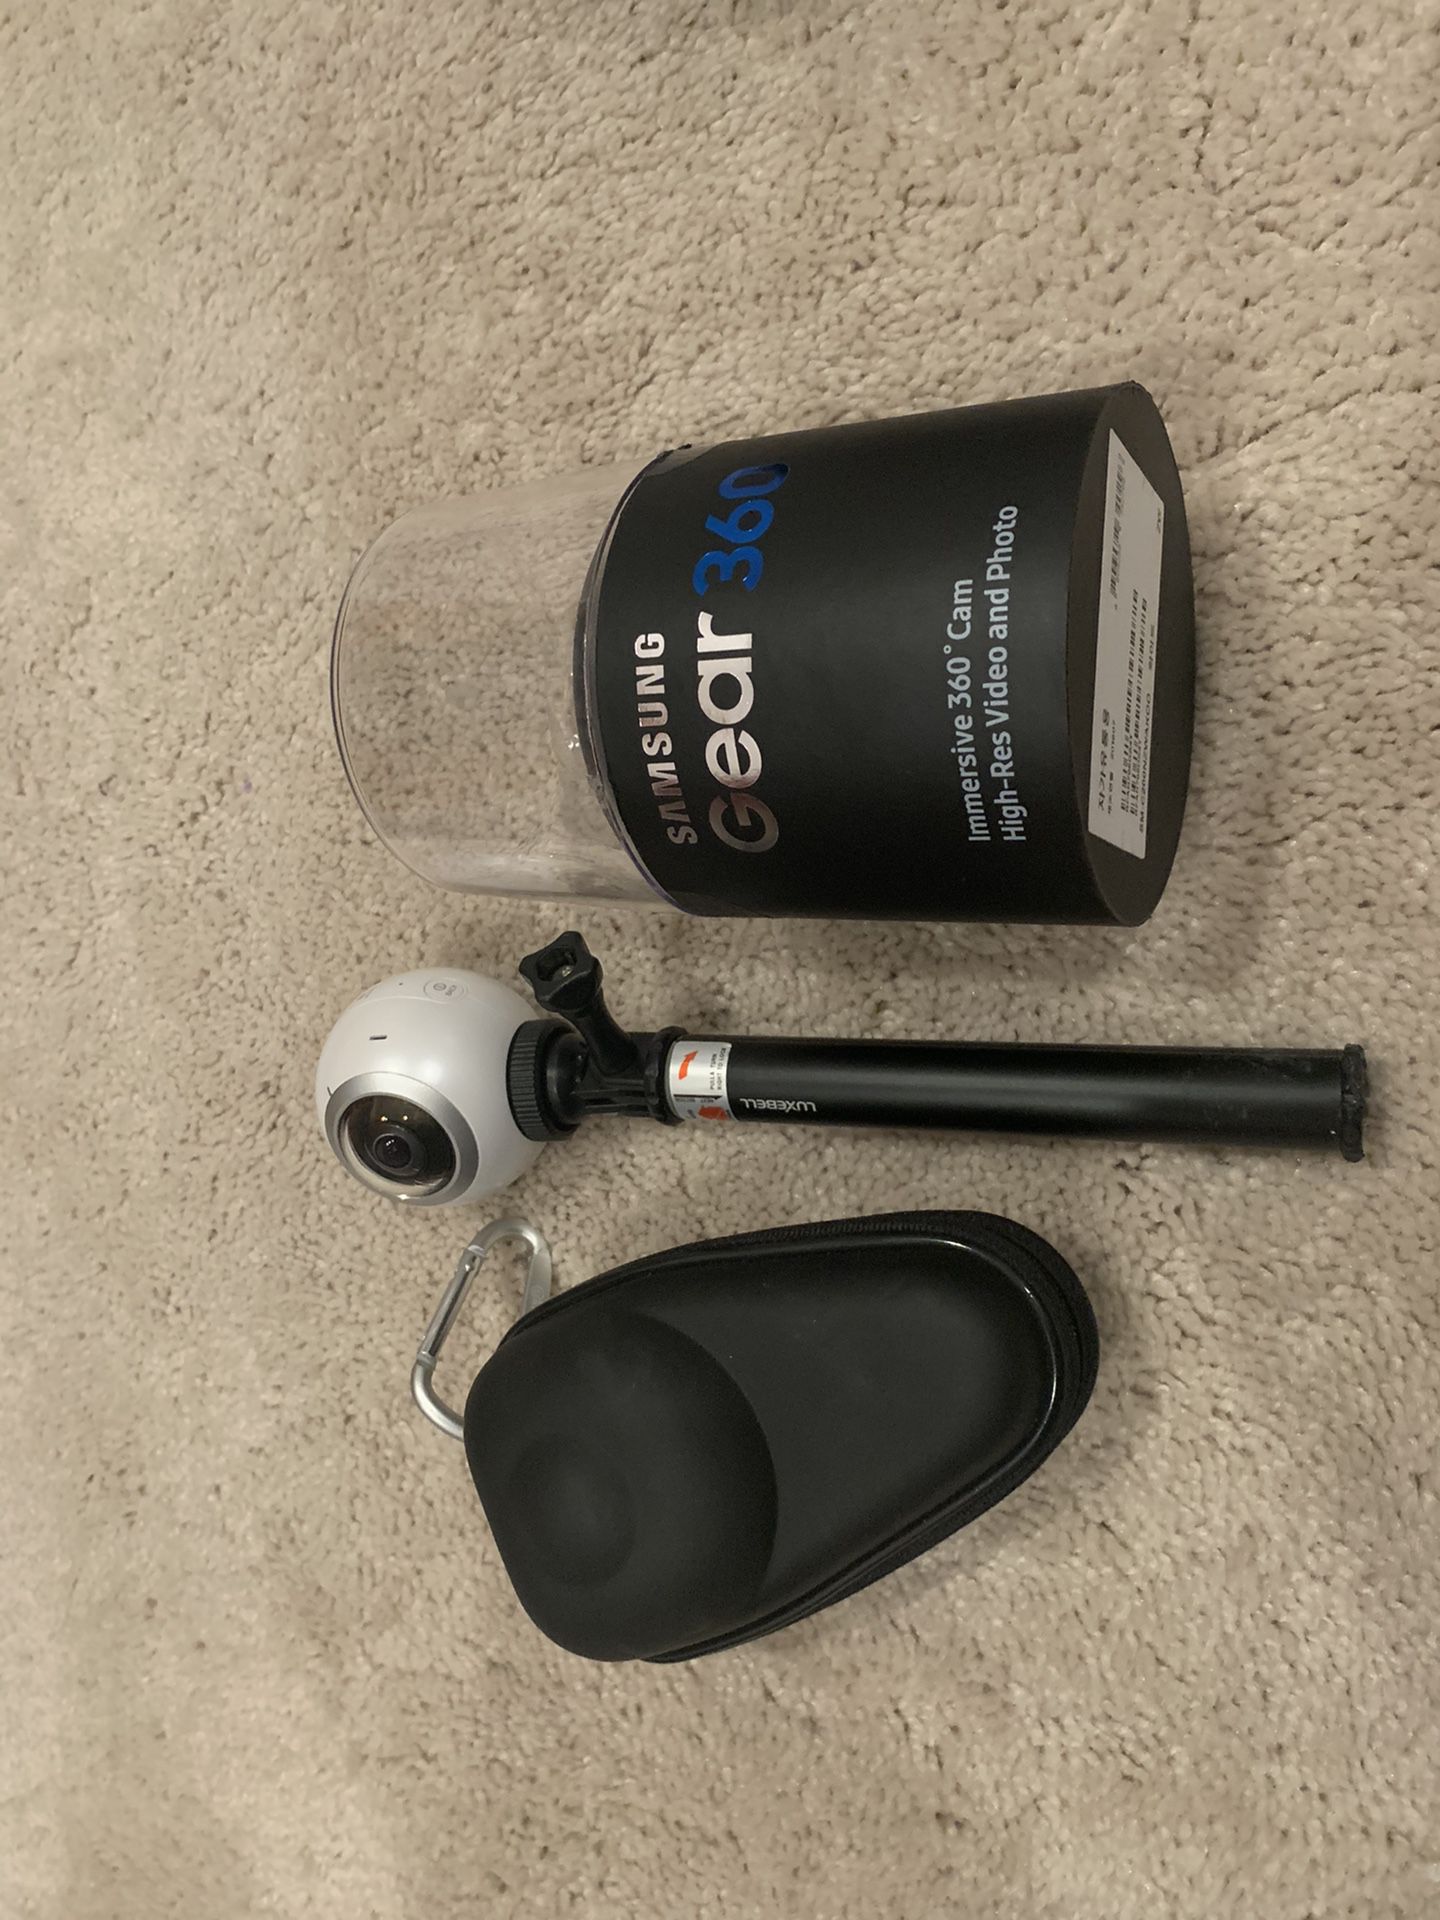 Gear 360 camera with case and stick set